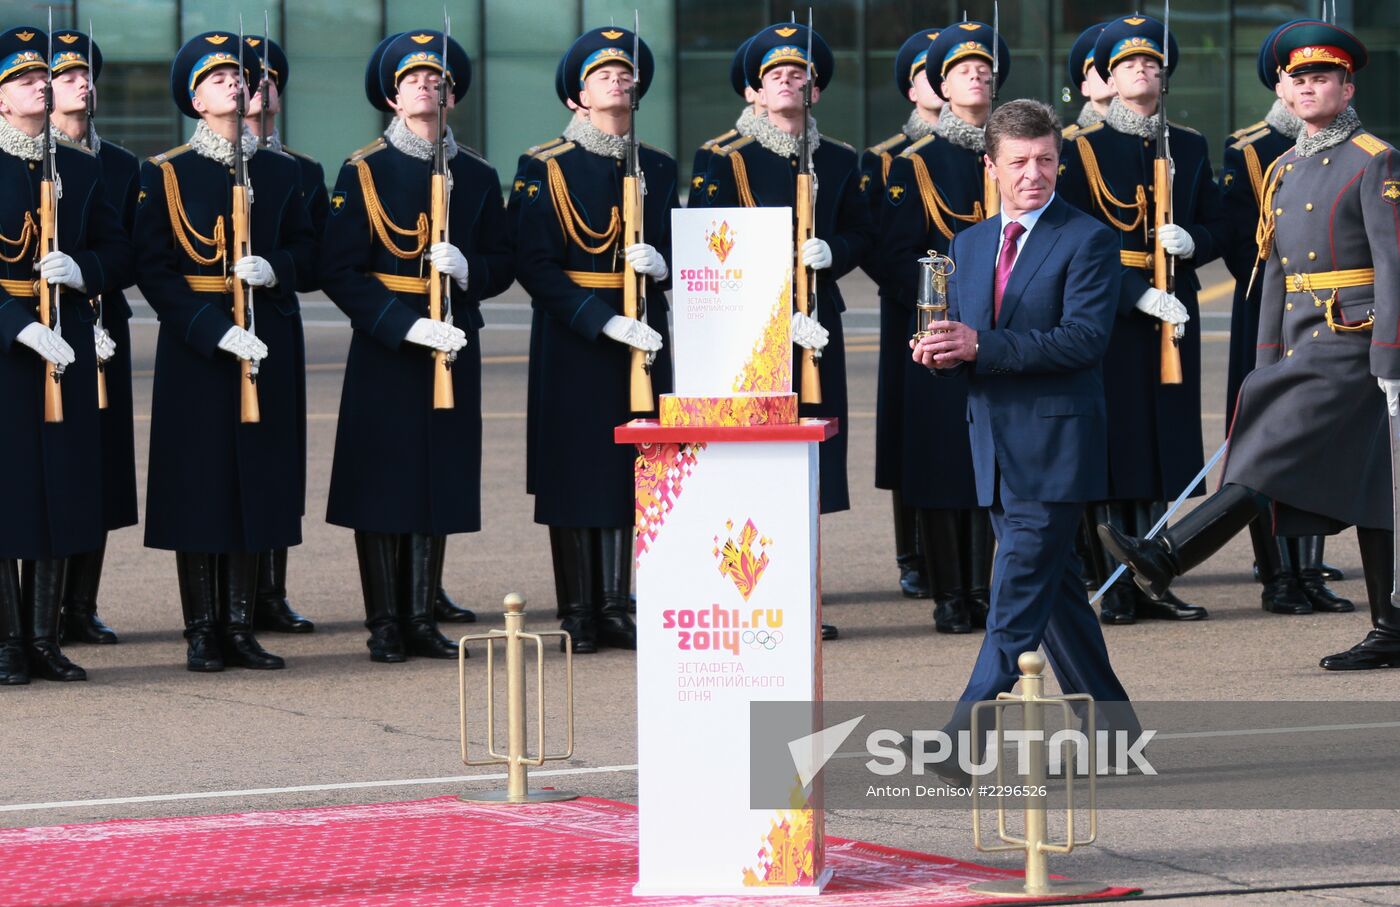 Olympic flame greeting ceremony in Moscow